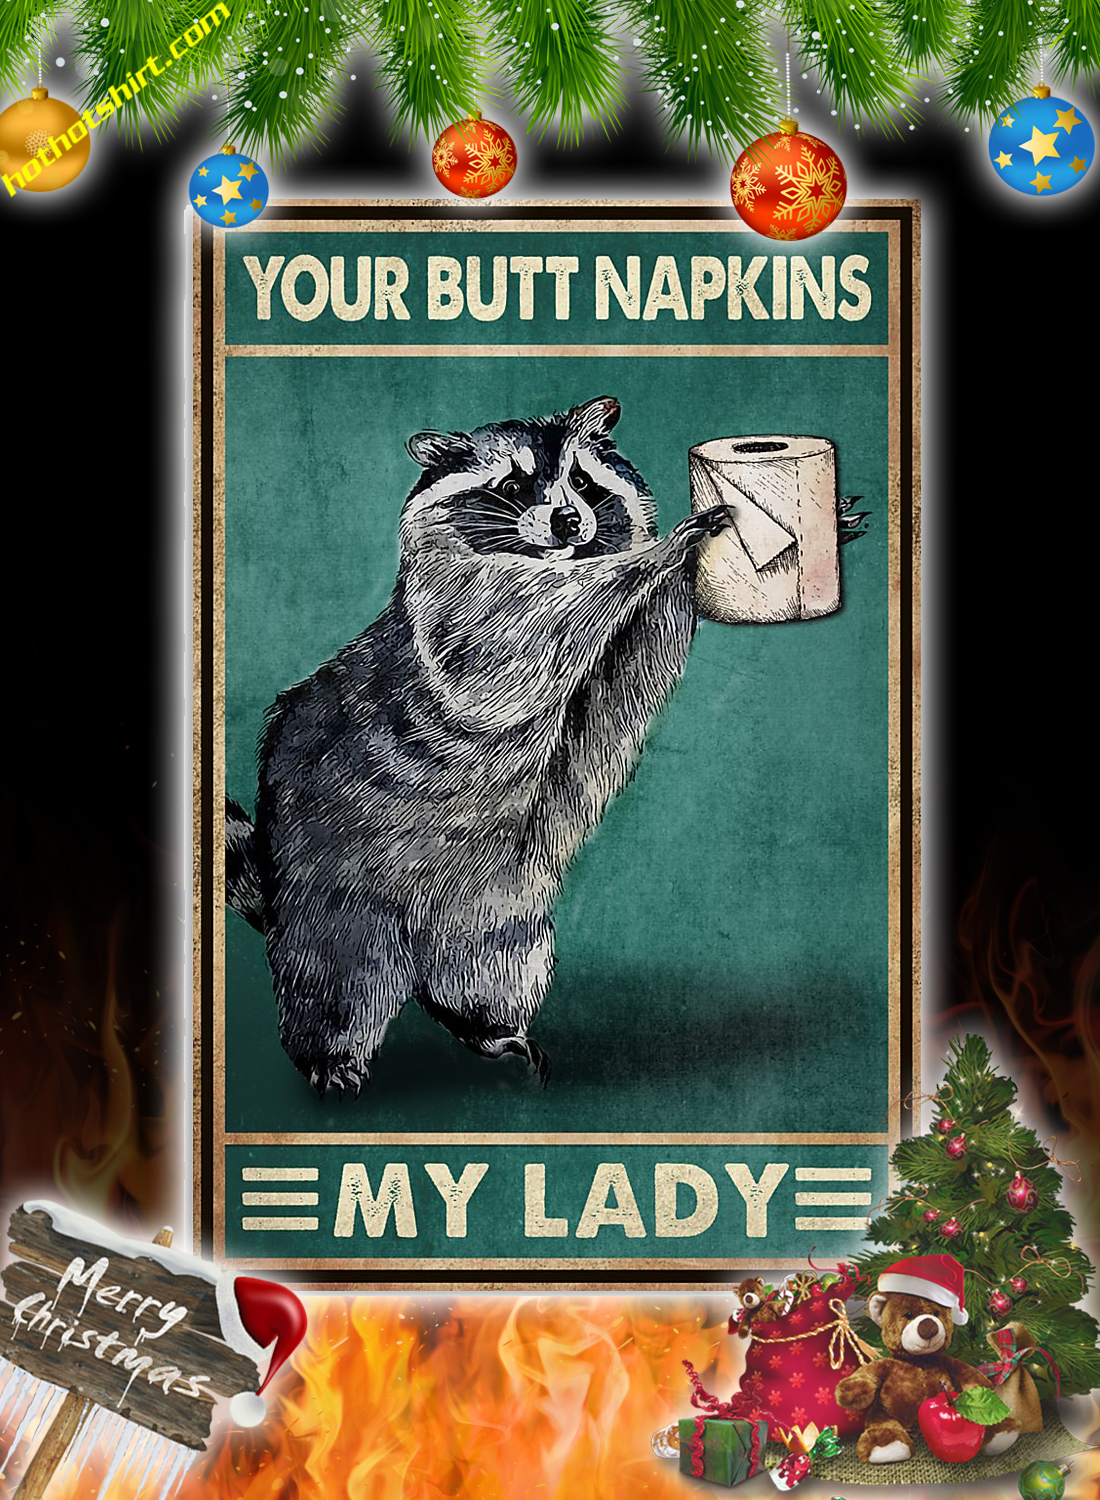 Raccoon Your butt napkins my lady poster